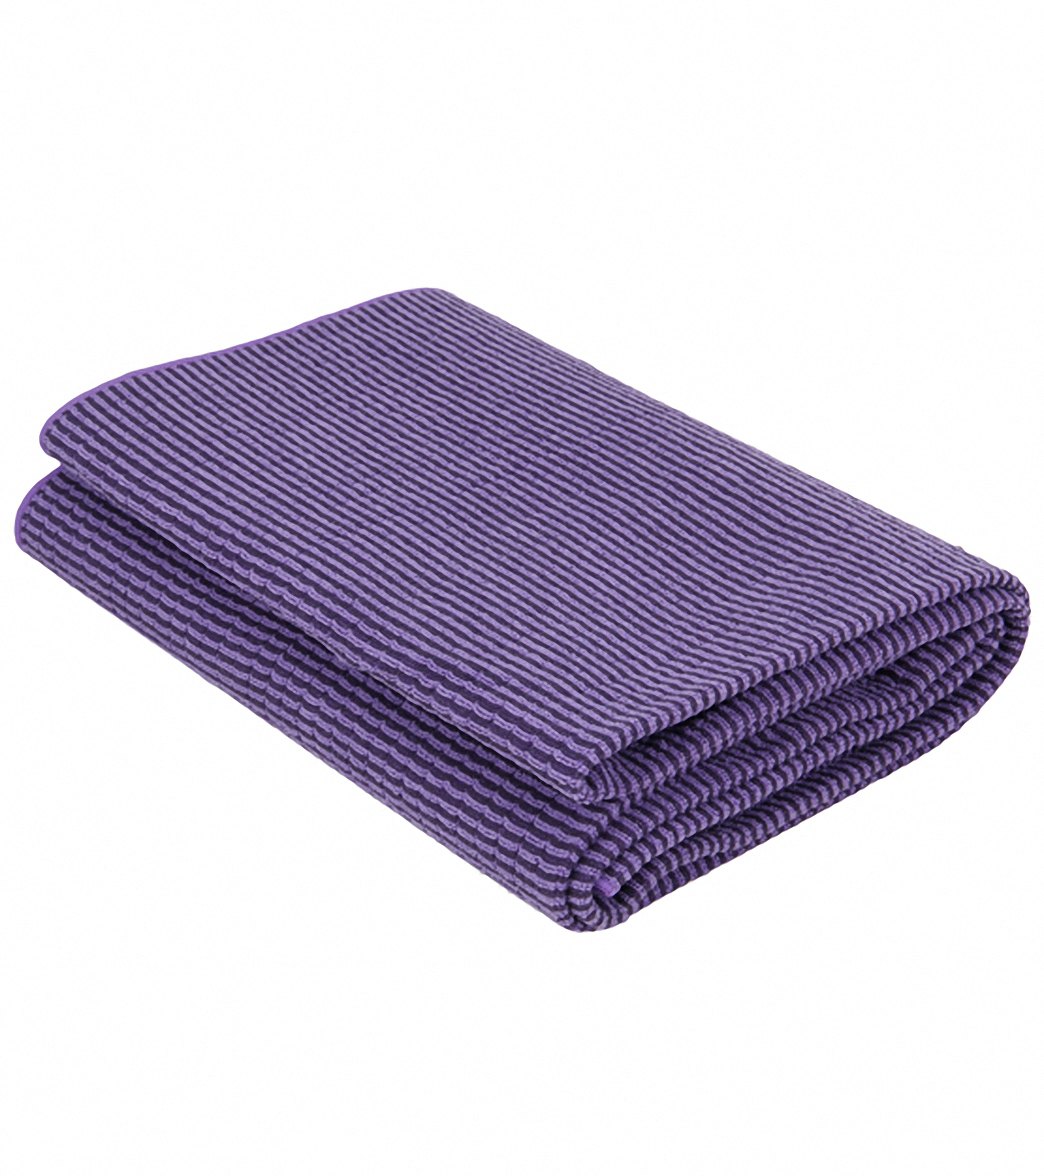 The 7 best yoga towels: Stay sweat, slip and distraction-free in class